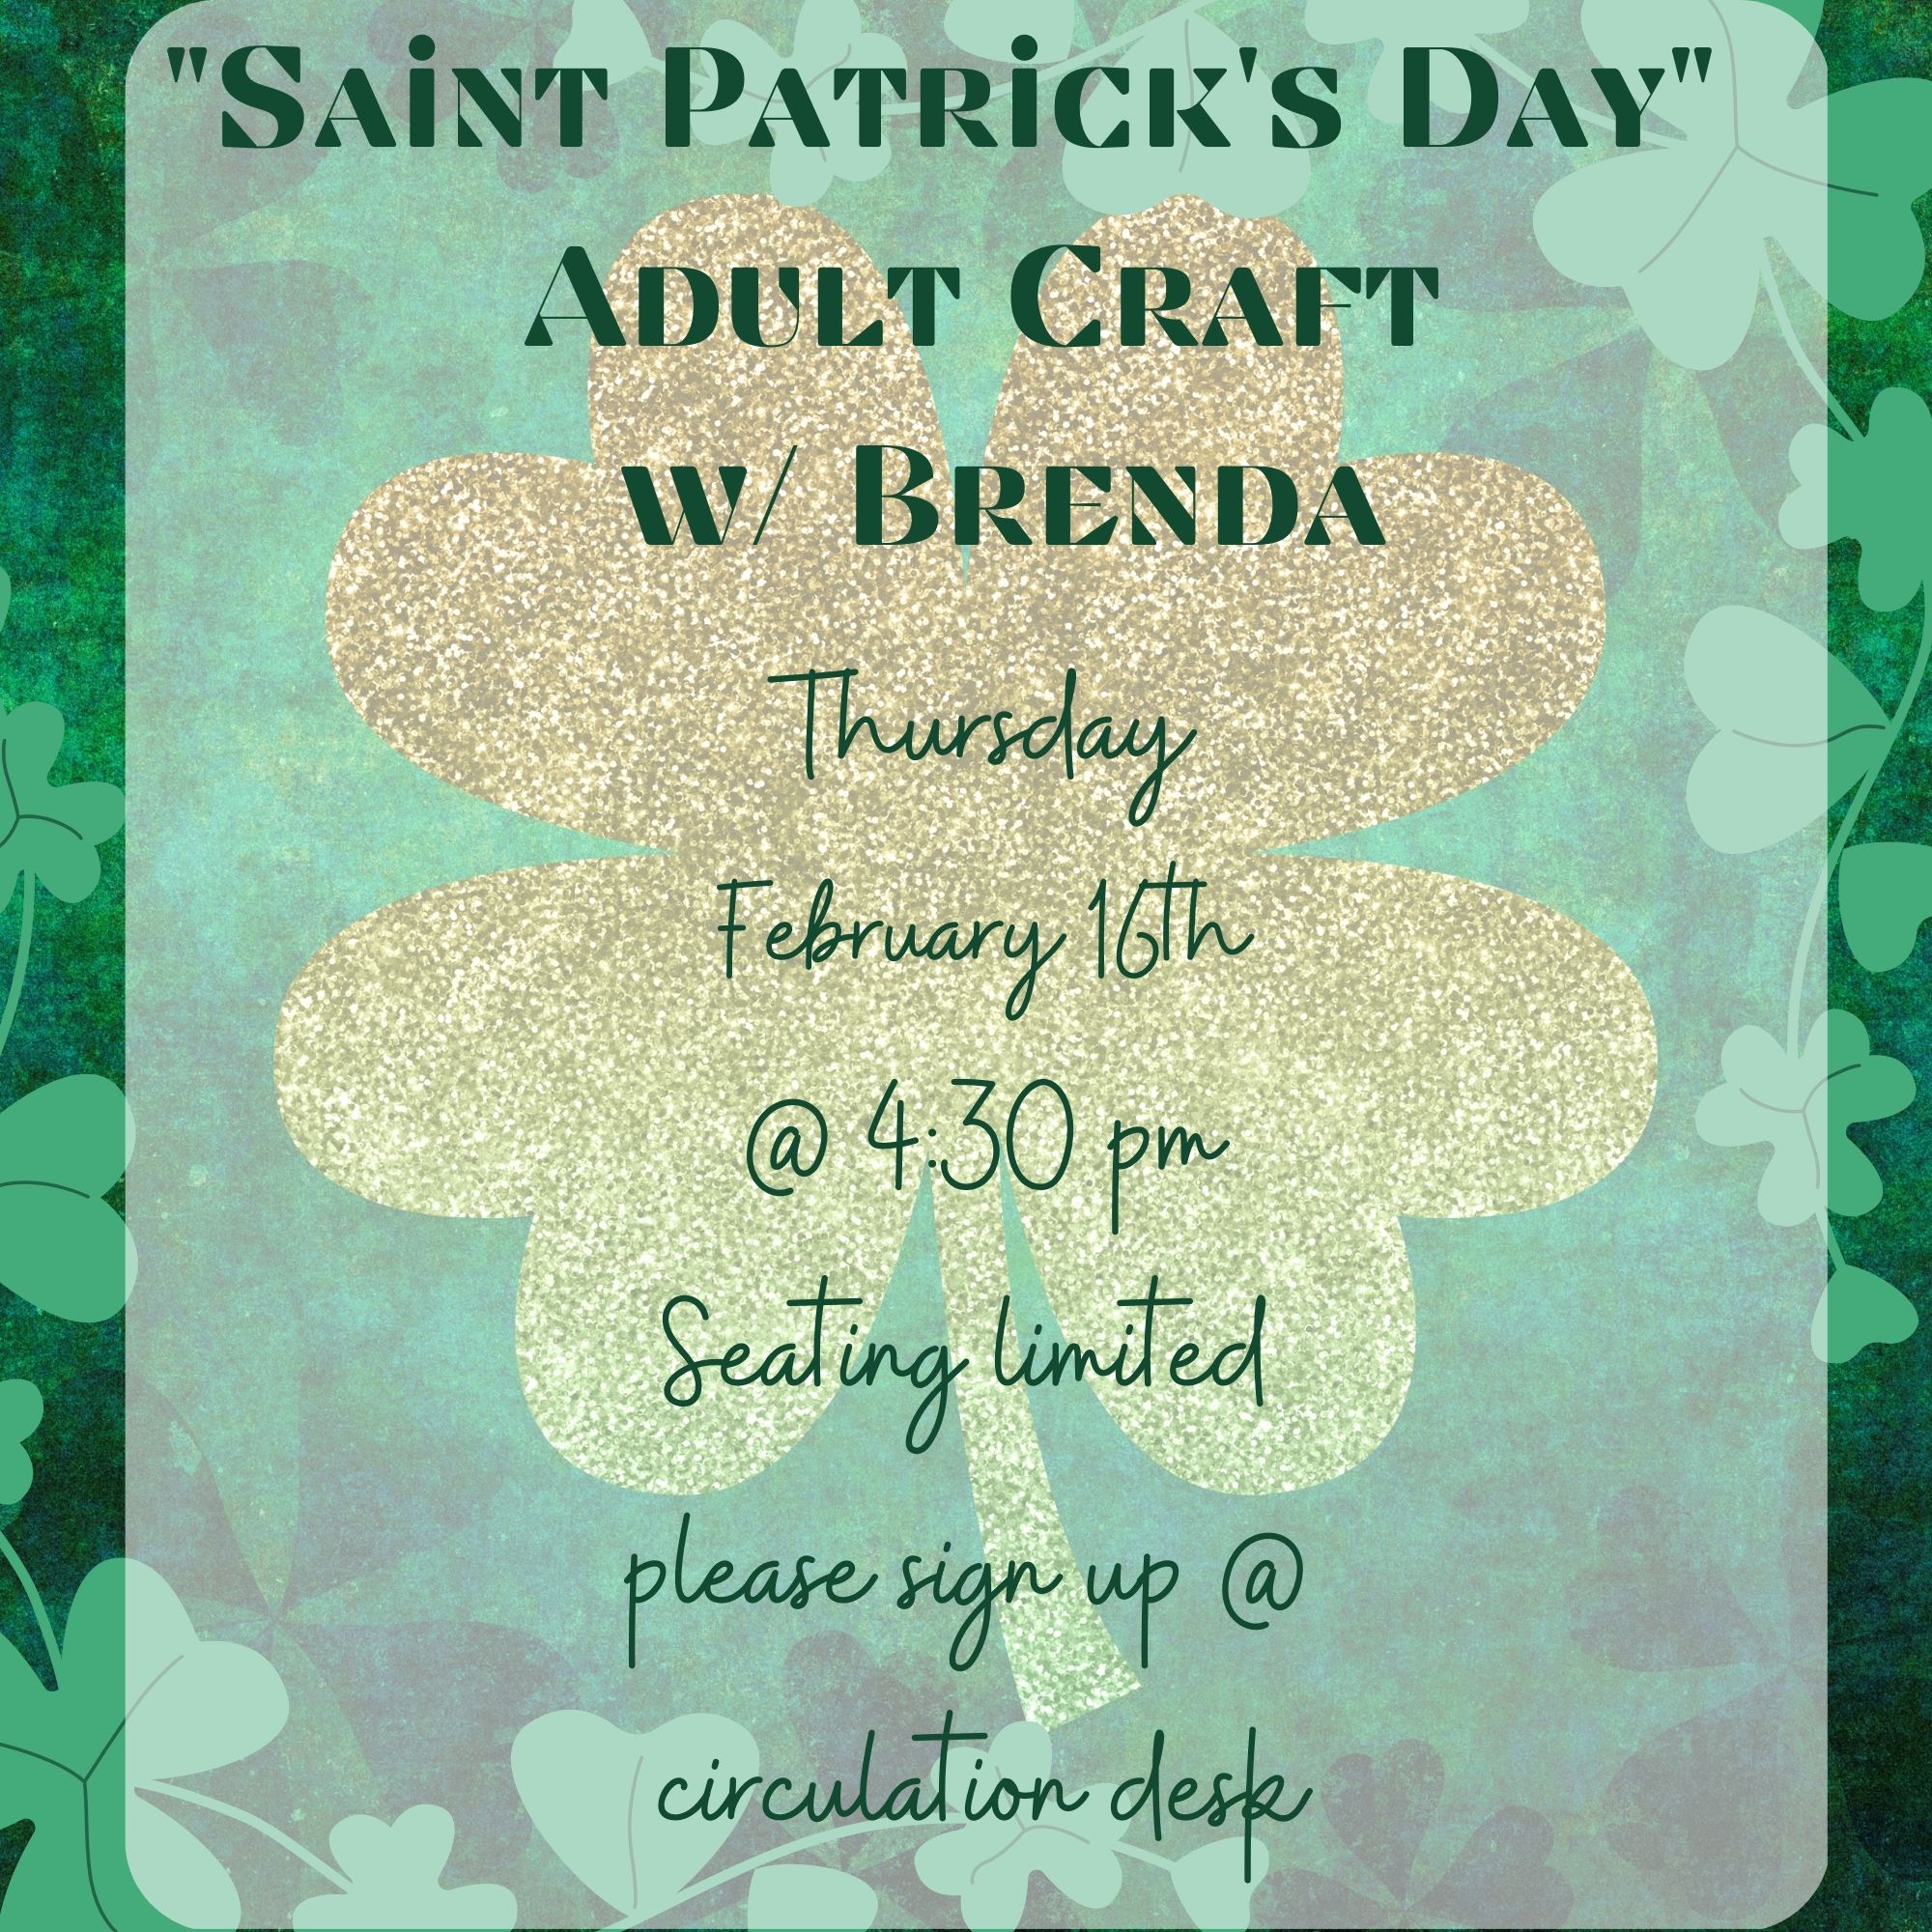 Saint Patrick's Day Craft for Adults w Brenda Wednesday February 15th @ 4pm Seating limited please sign up @ circulation desk